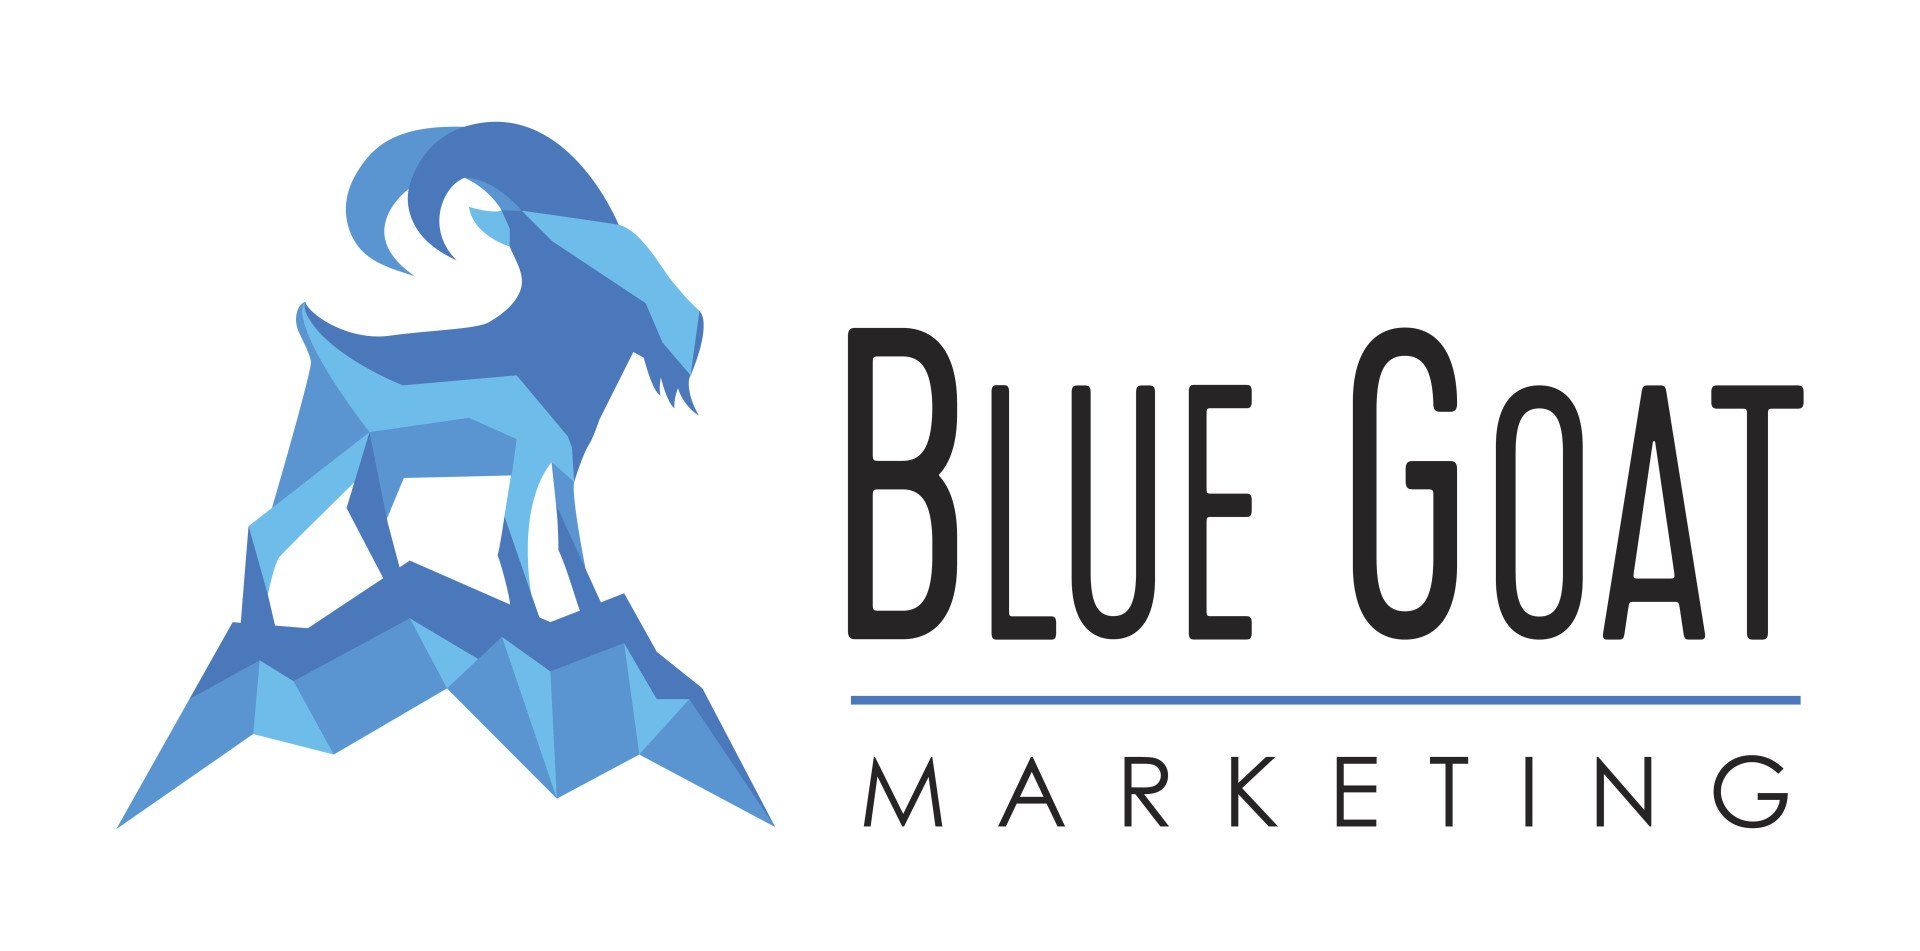 The logo for blue goat marketing shows a blue goat standing on top of a mountain.